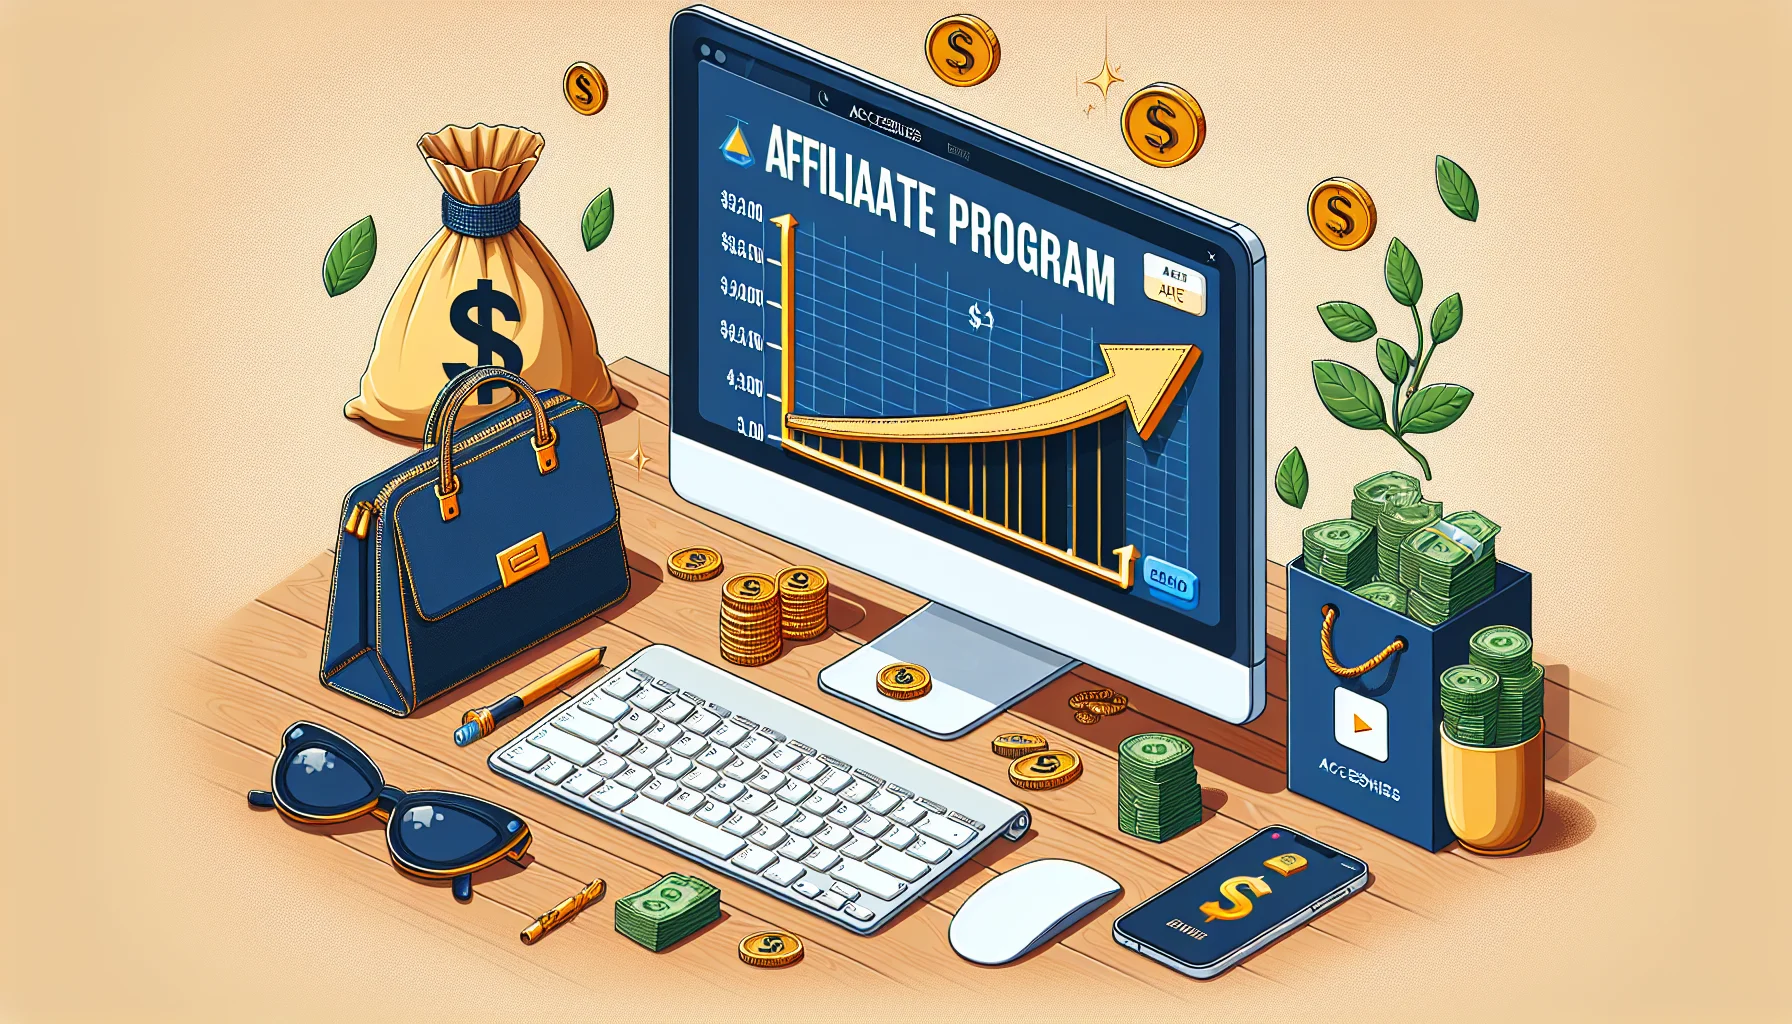 Create a humorous and realistic image showcasing an accessory brand's affiliate program. Picture a computer screen displaying a high earnings chart indicating successful online monetary gains. Surround the screen with enticing symbols of success such as a rising arrow indicating growth, coins, and bags of money. Include accessories such as stylish bags and clothing with a classy logo that is similar to high-end brands, but is not specifically any real brand name.